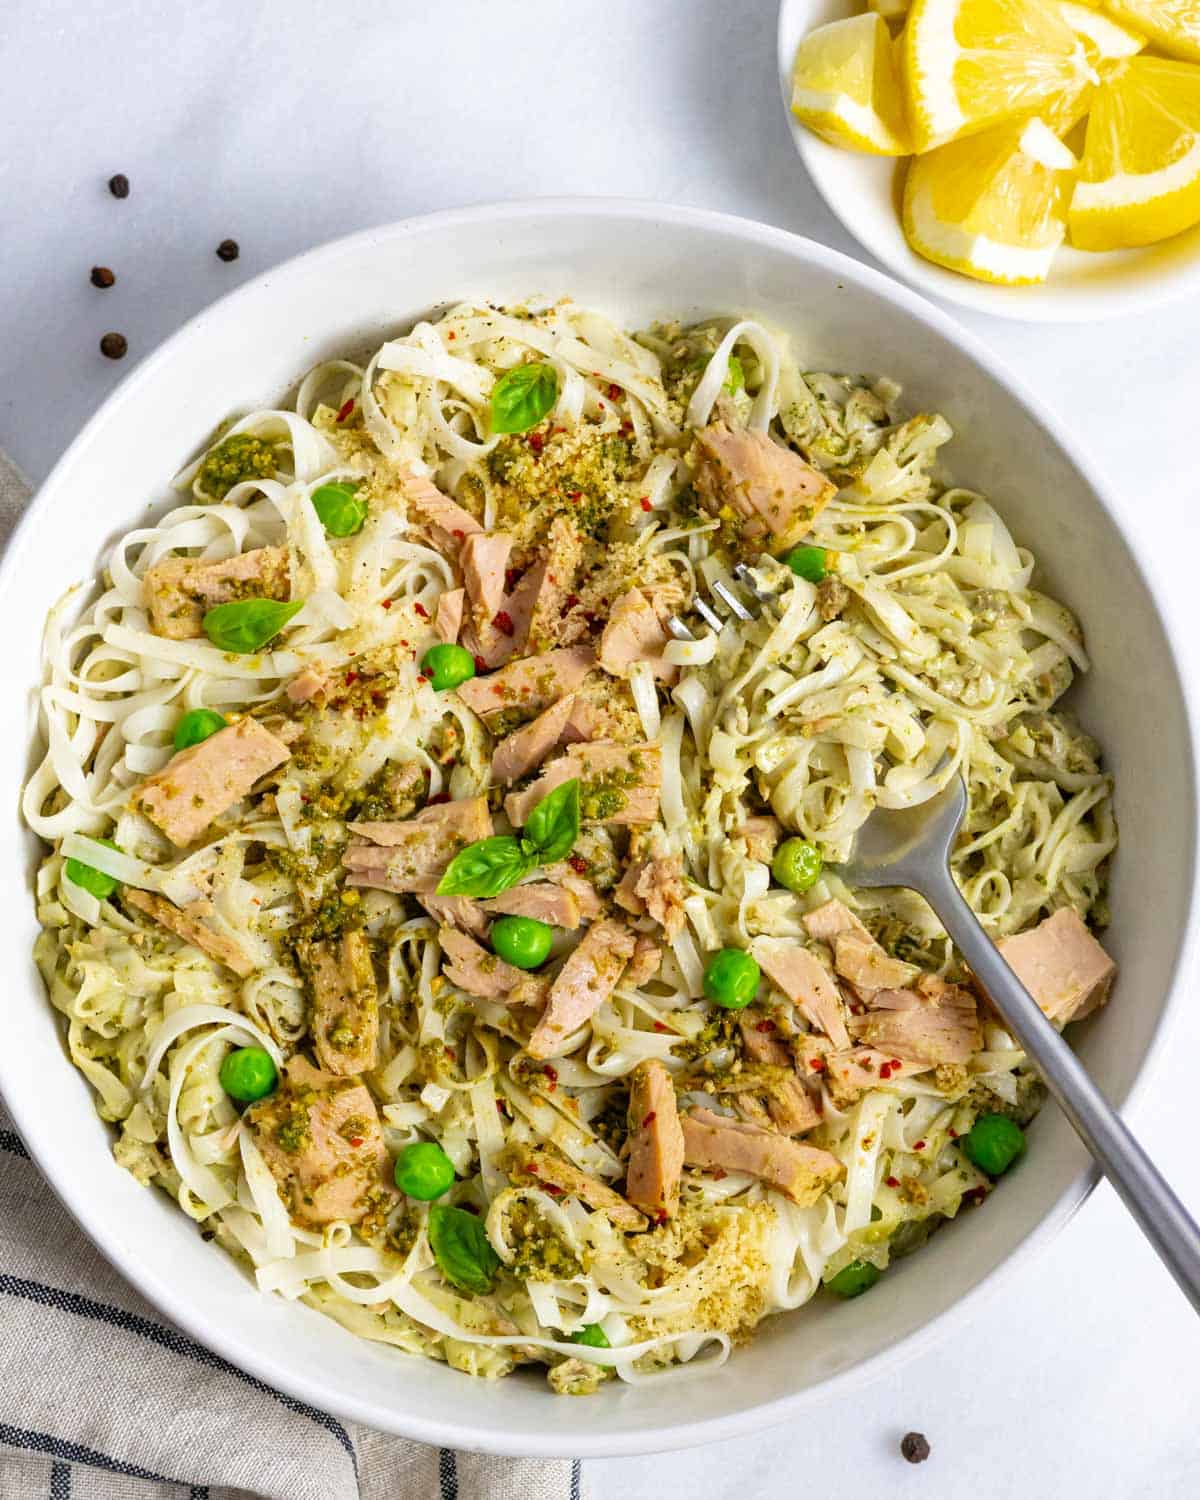 Tuna pesto pasta in a bowl with a forkful of noodles.